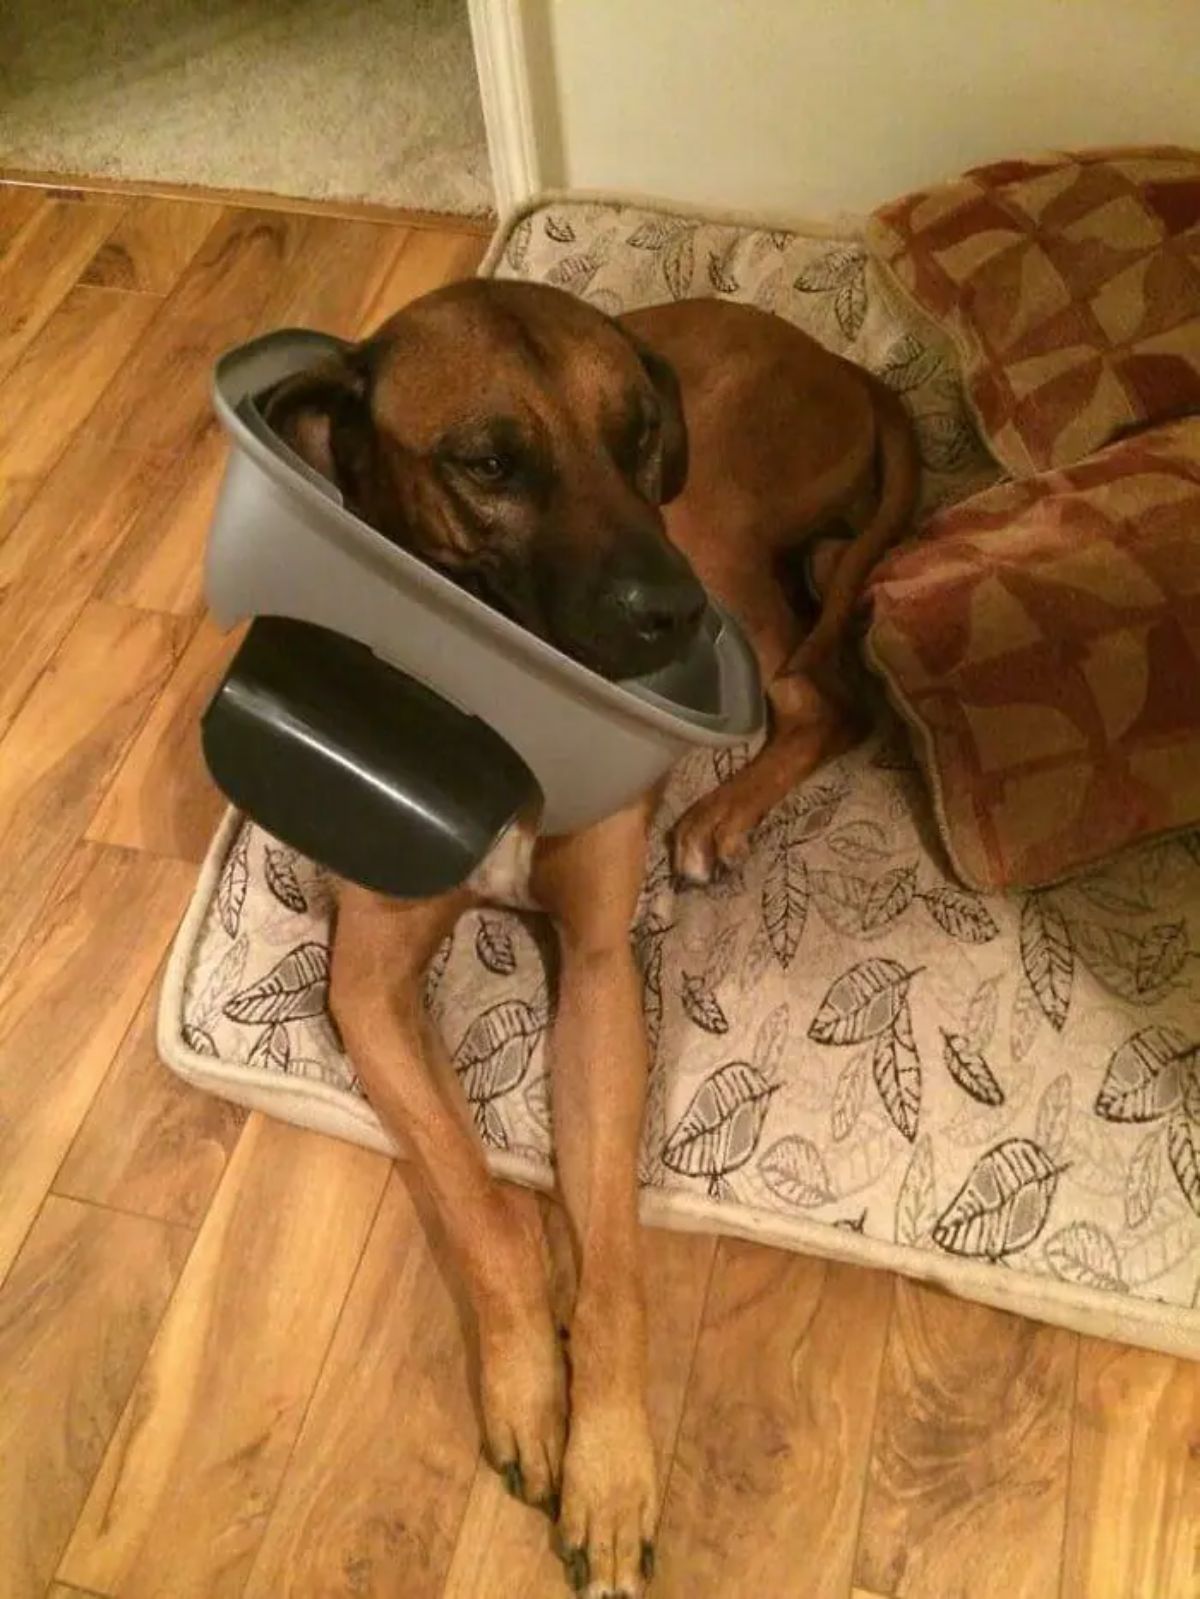 brown dog laying on a brown patterned dog bed with the head stuck in a grey and black top of a trash can